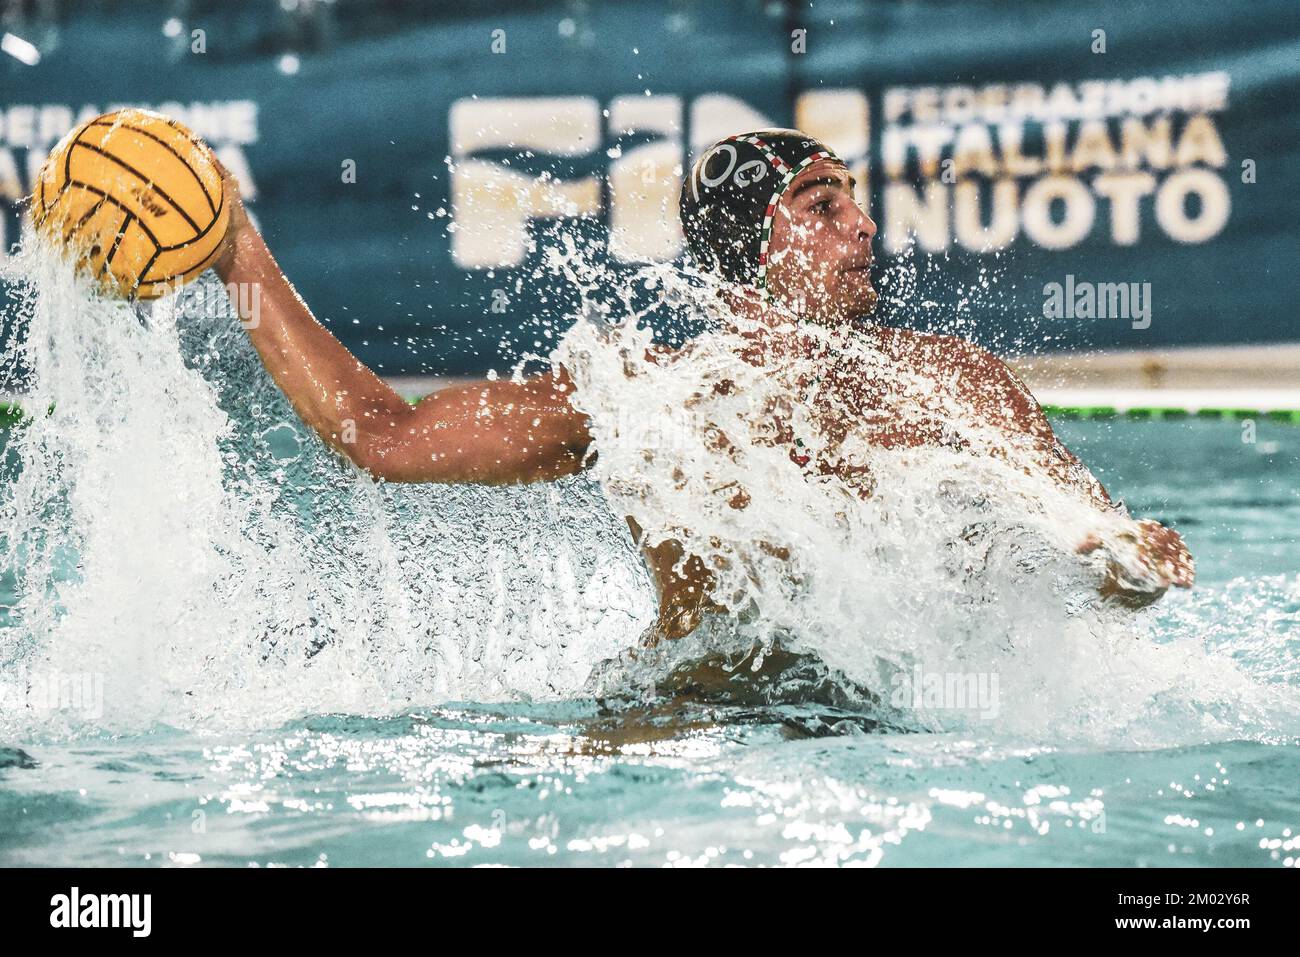 Anzio, Italy. 03rd Dec, 2022. Velotto(Pro Recco) during Anzio Waterpolis vs Pro Recco, Waterpolo Italian Serie A match in Anzio, Italy, December 03 2022 Credit: Independent Photo Agency/Alamy Live News Stock Photo